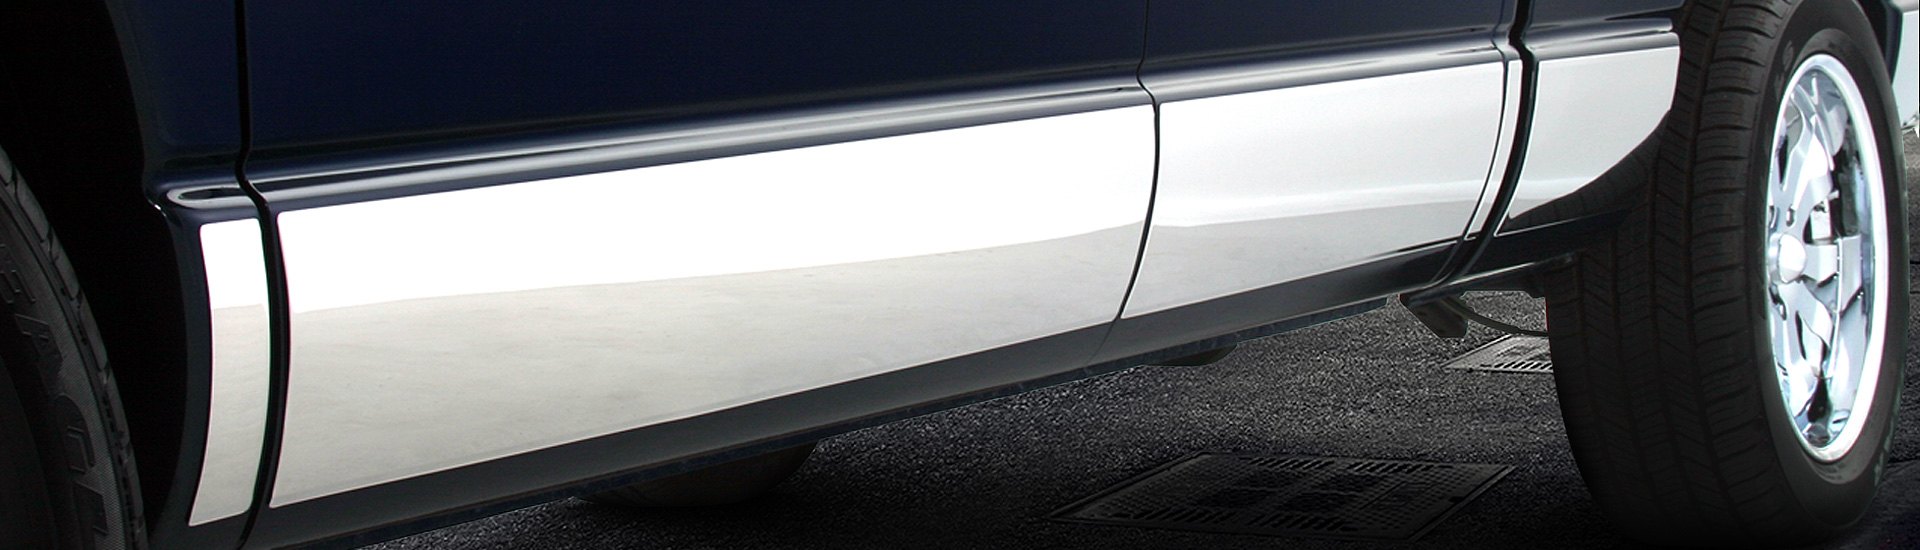 Fitment, Style, Installation | Rocker Panel Trim Options Explained